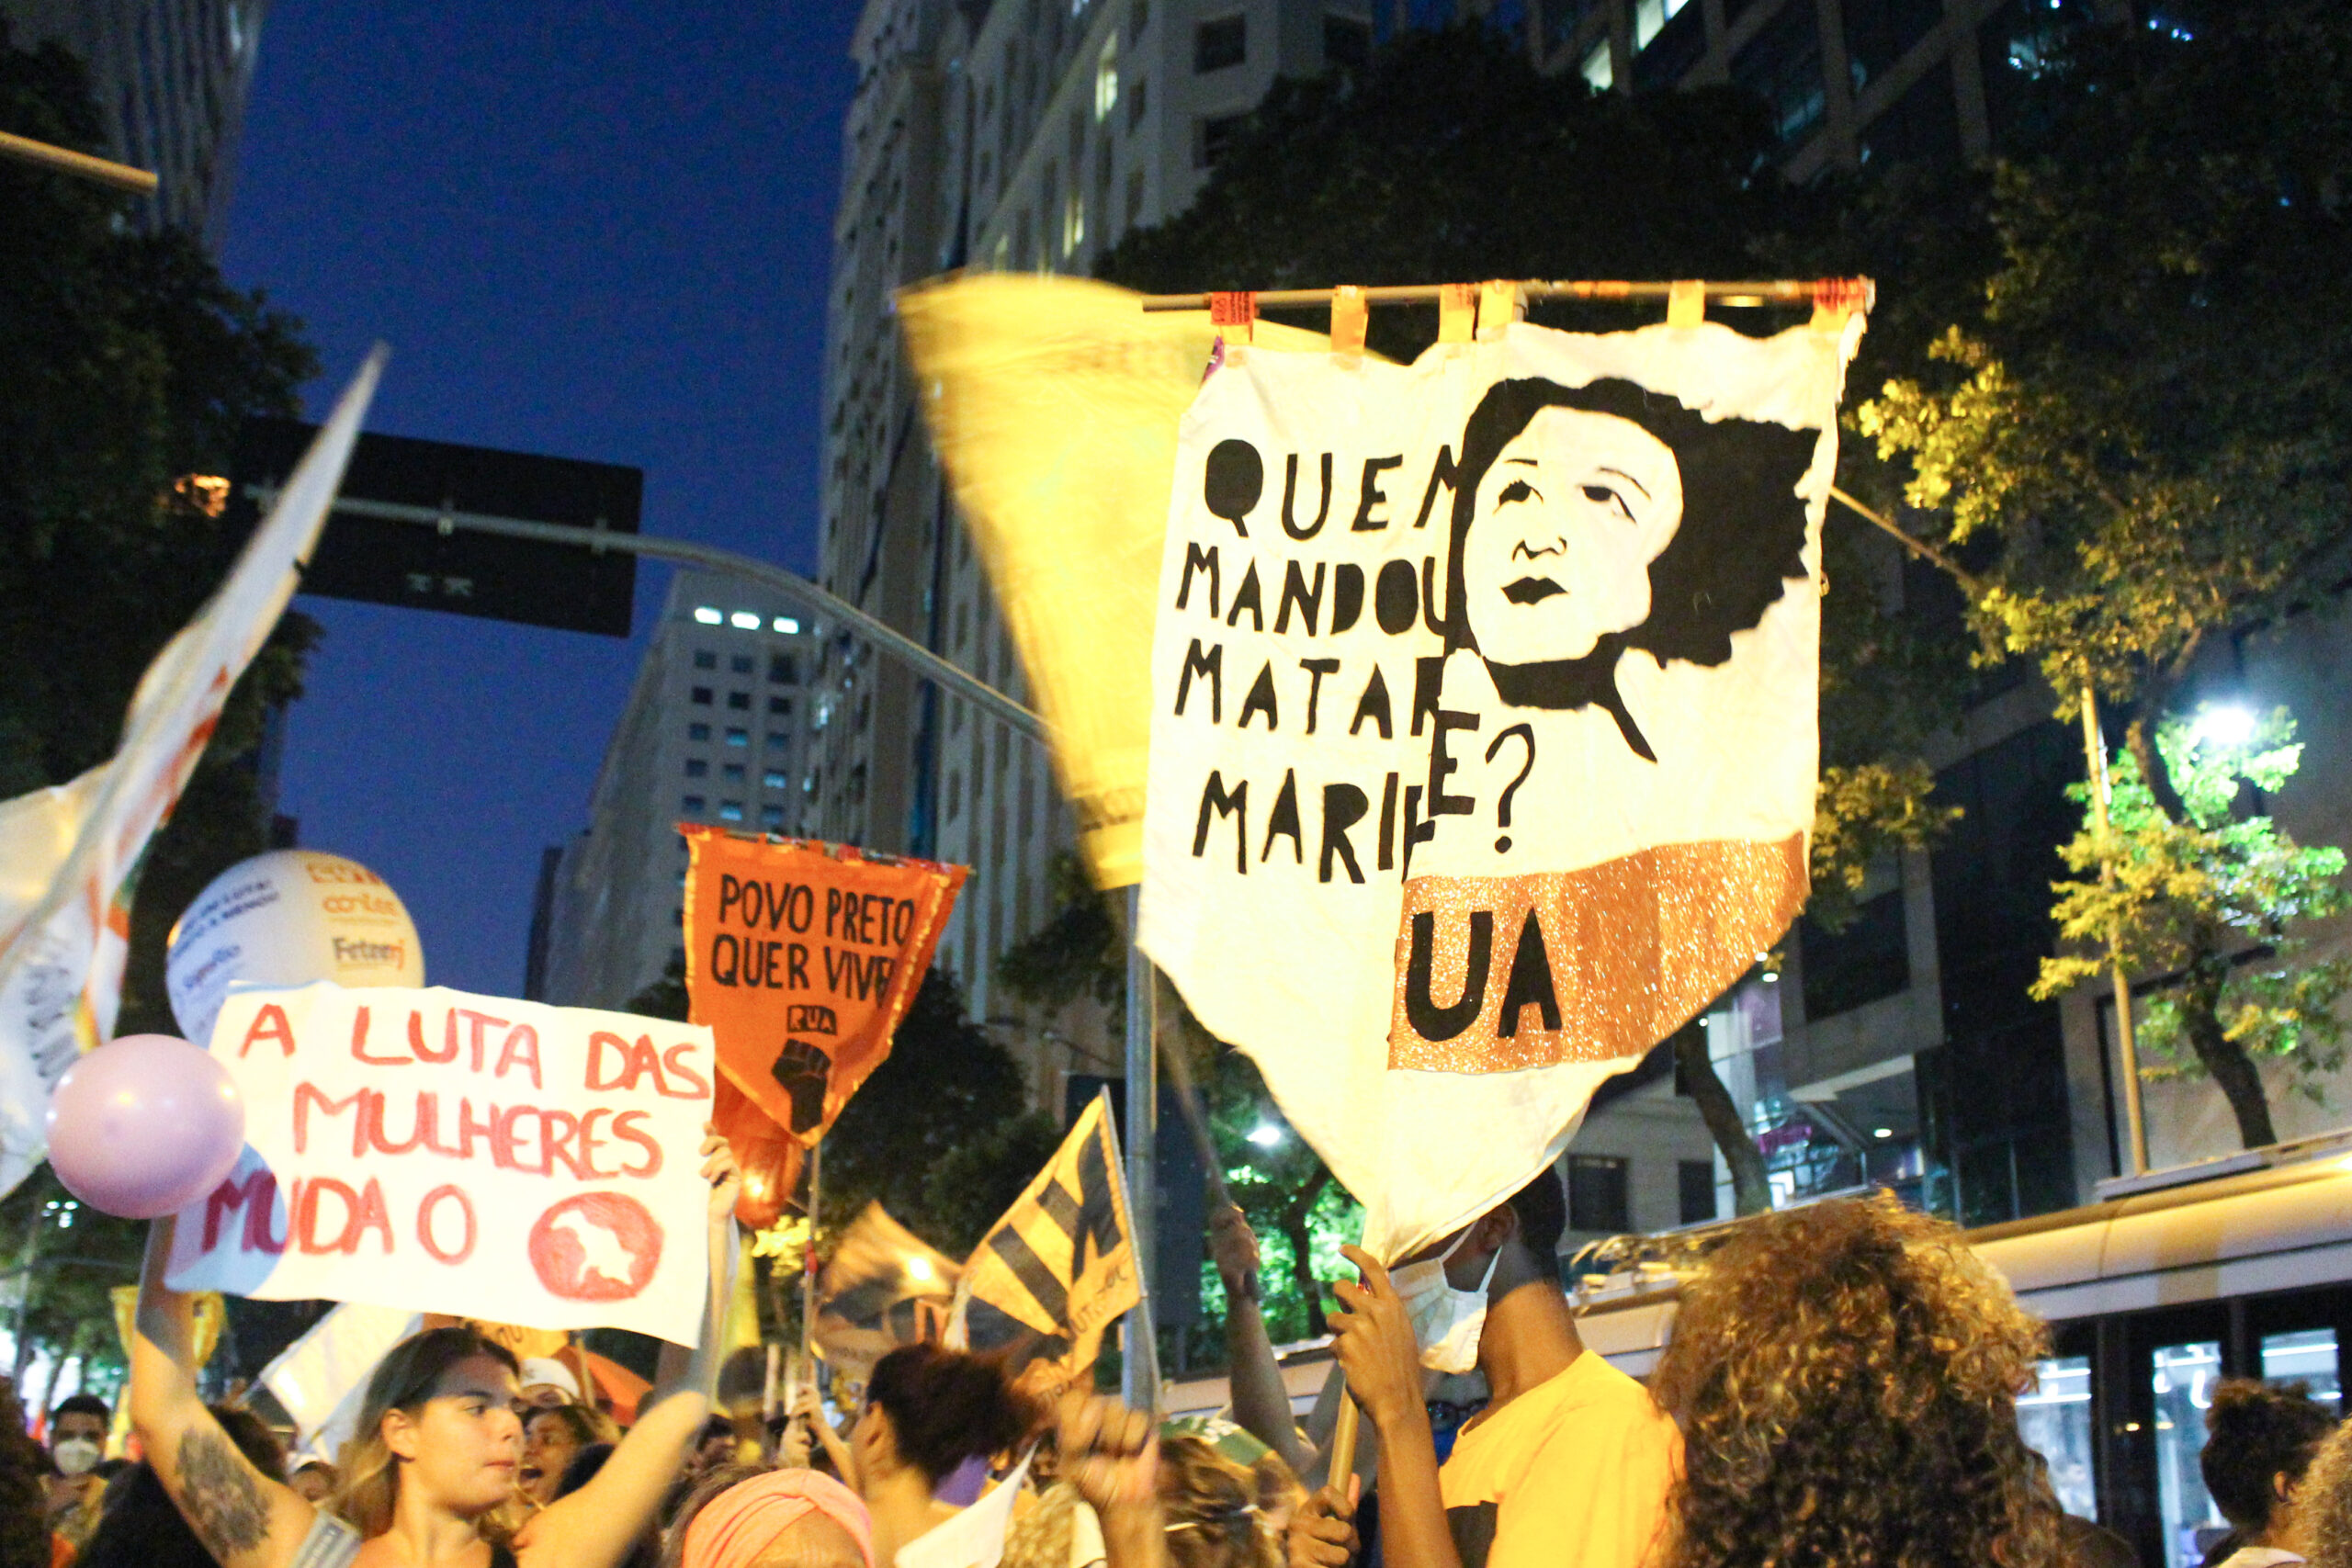 Flags and banners asked: "Who ordered Marielle's murder?" Photo: Jaqueline Suarez